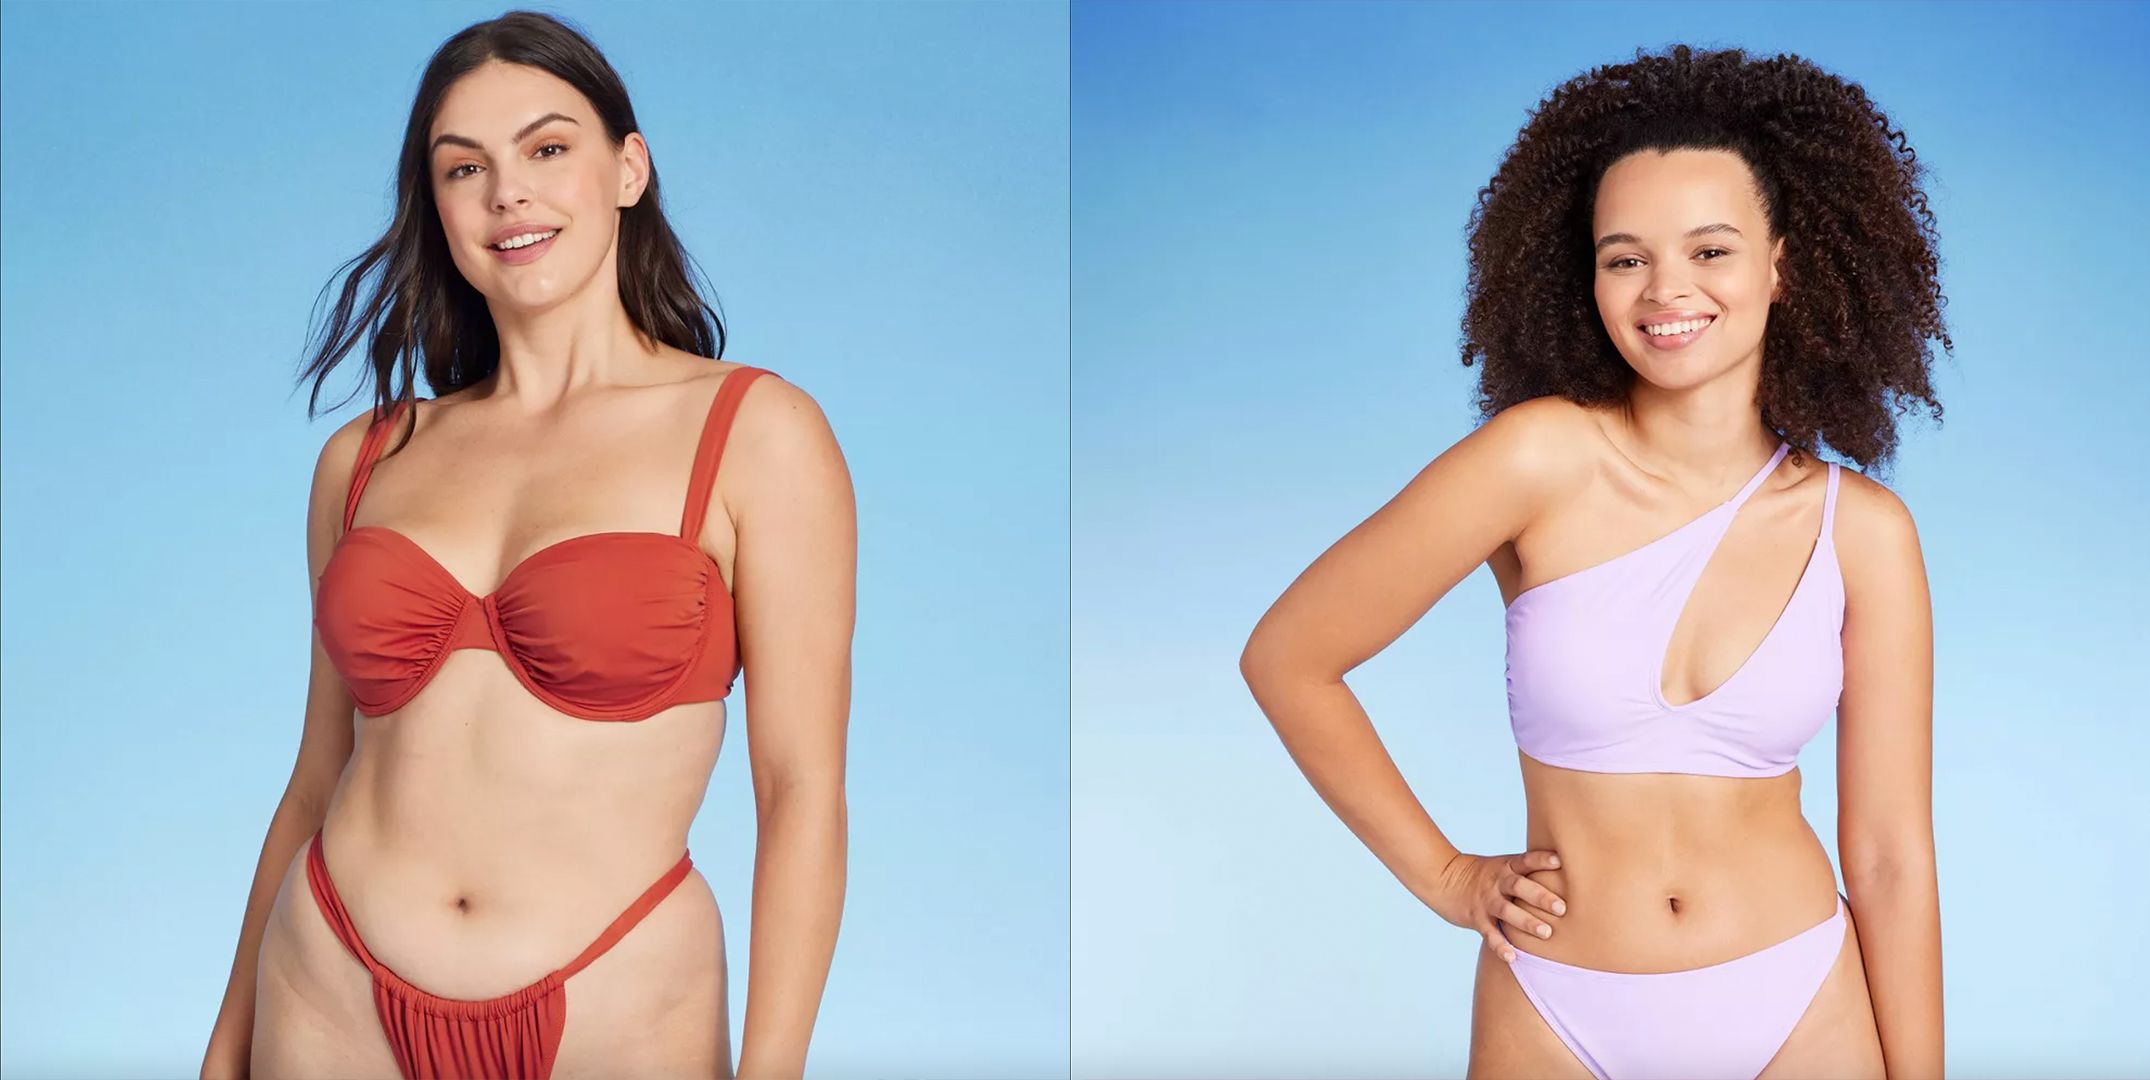 Stylish Swimsuits From Target That You Need For Your Next Vacation